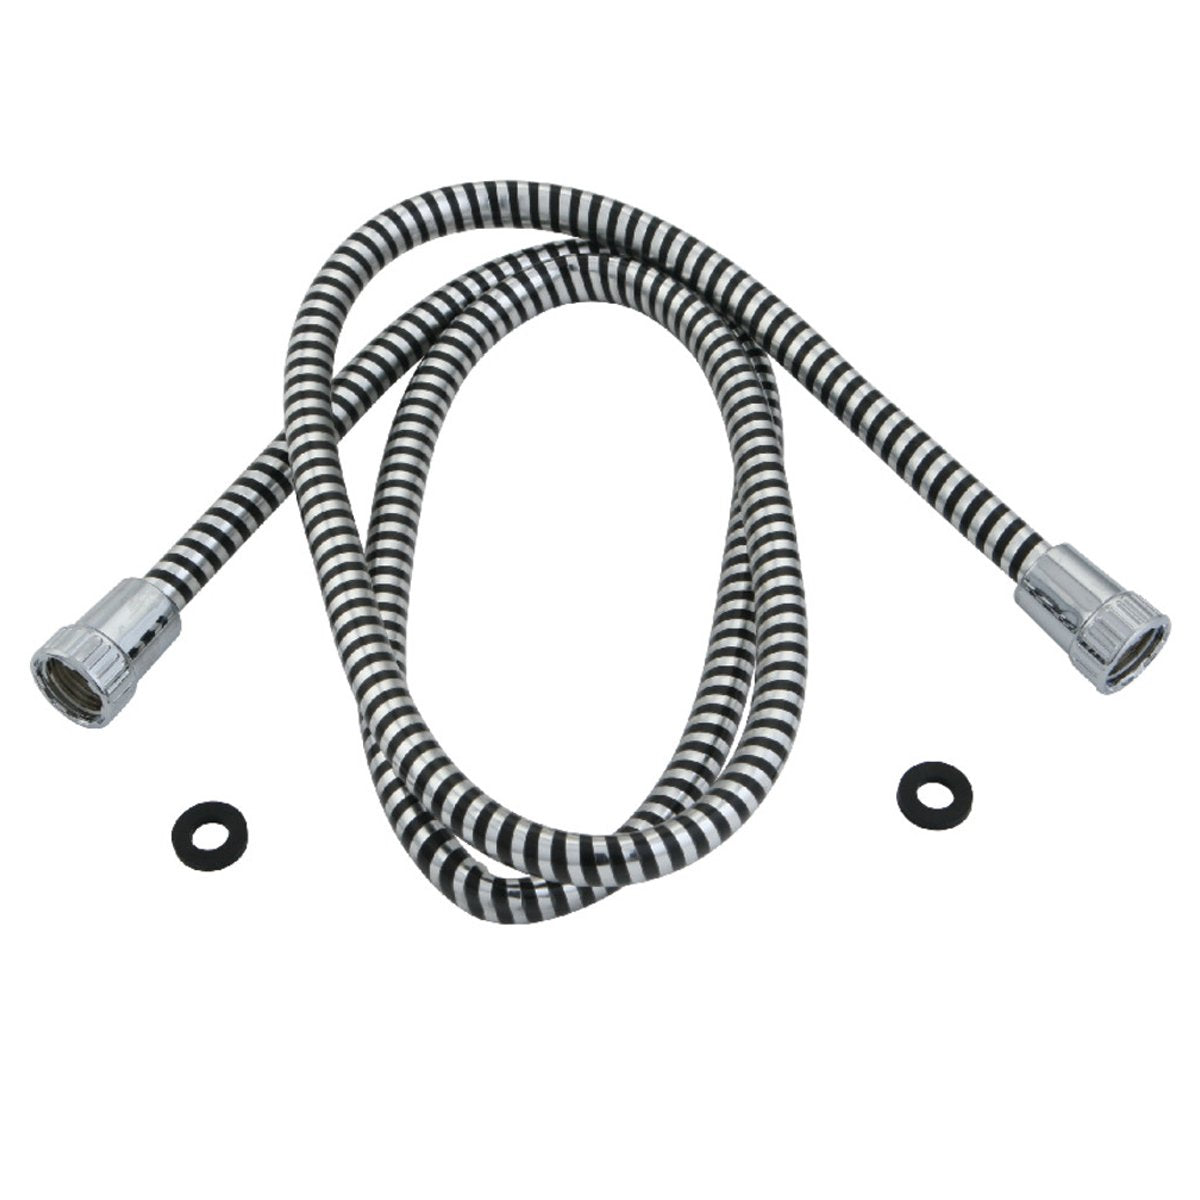 Kingston Brass 59" Plastic Hose For KX2101 and KX2522 Series in Black and Silver